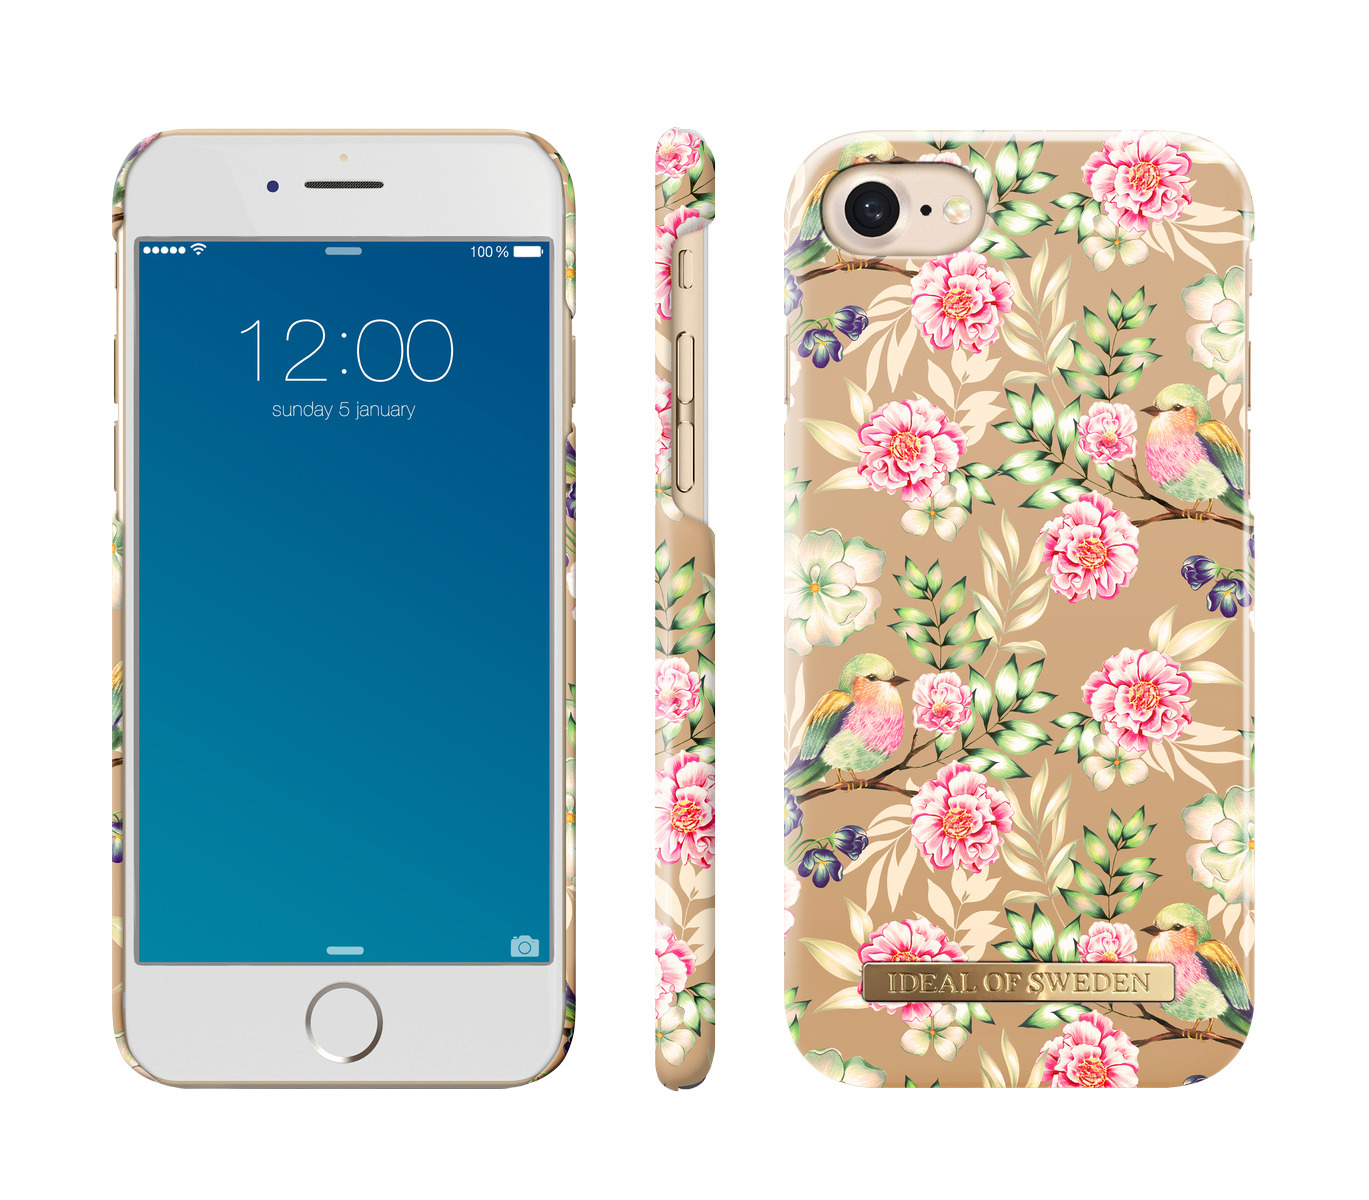 IDEAL OF SWEDEN Birds Champagne 7, 8, Apple, 6, iPhone Backcover, iPhone iPhone Fashion